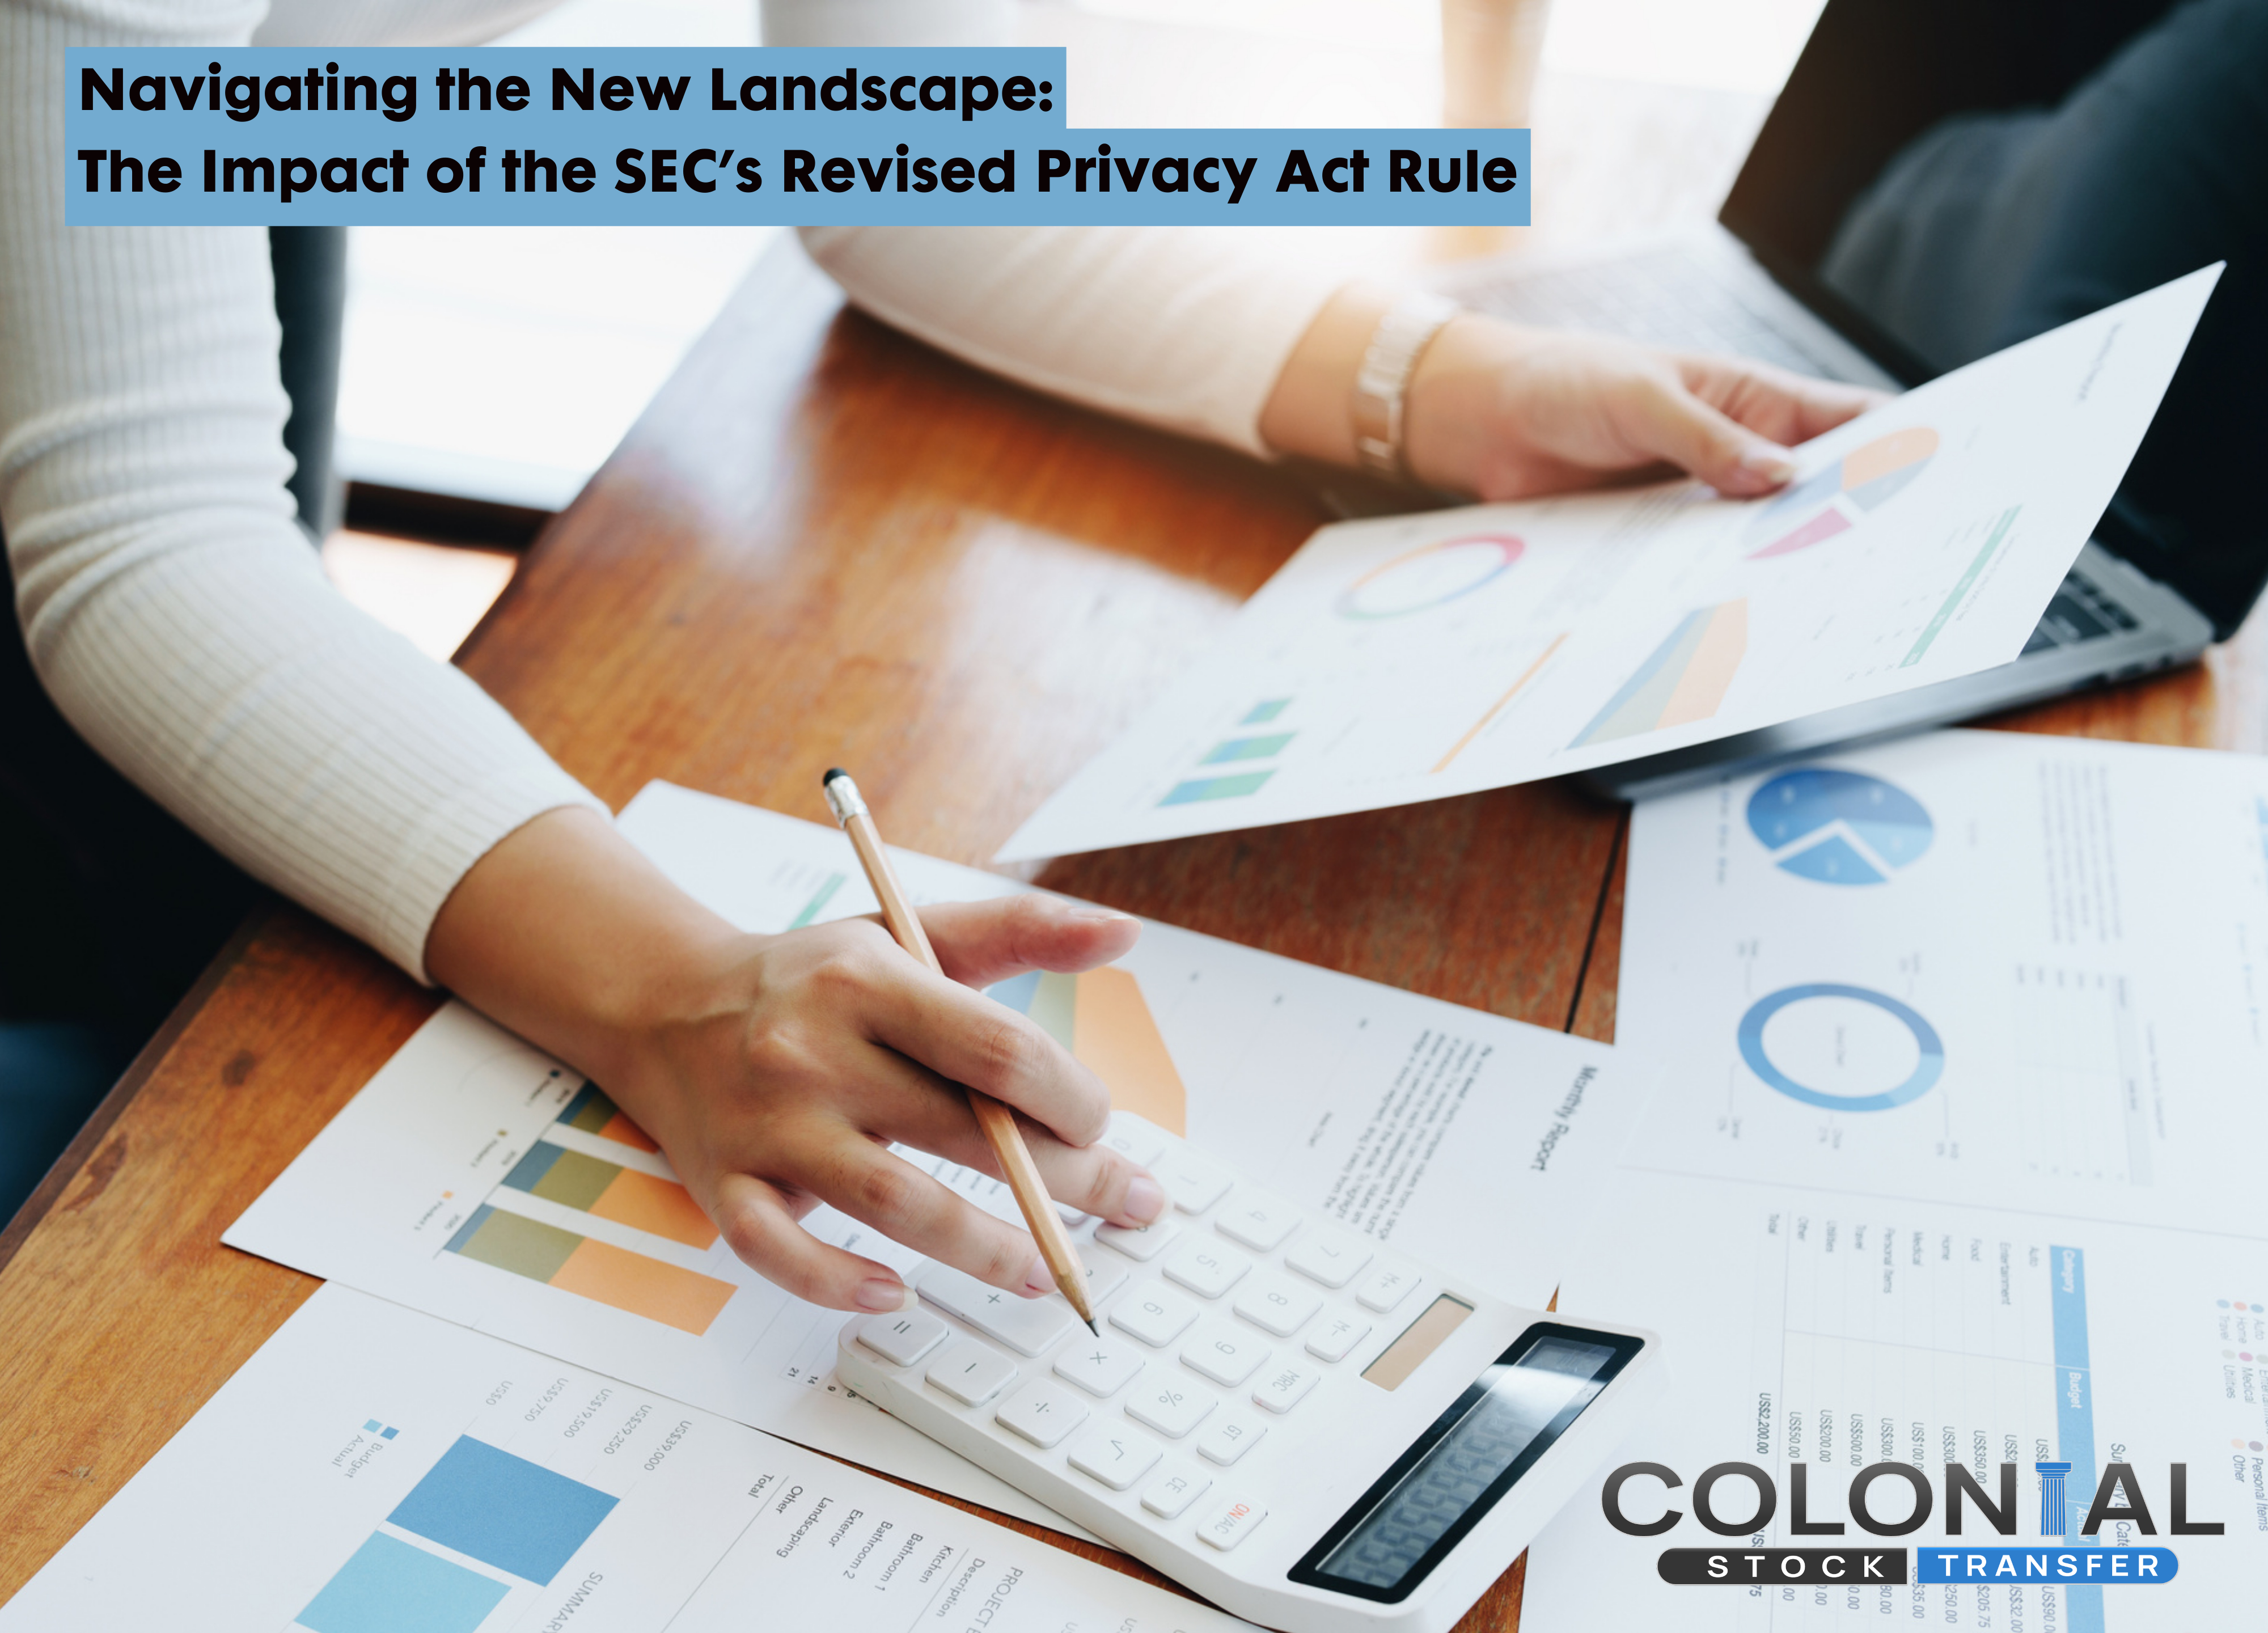 Navigating the New Landscape: The Impact of the SEC’s Revised Privacy Act Rule